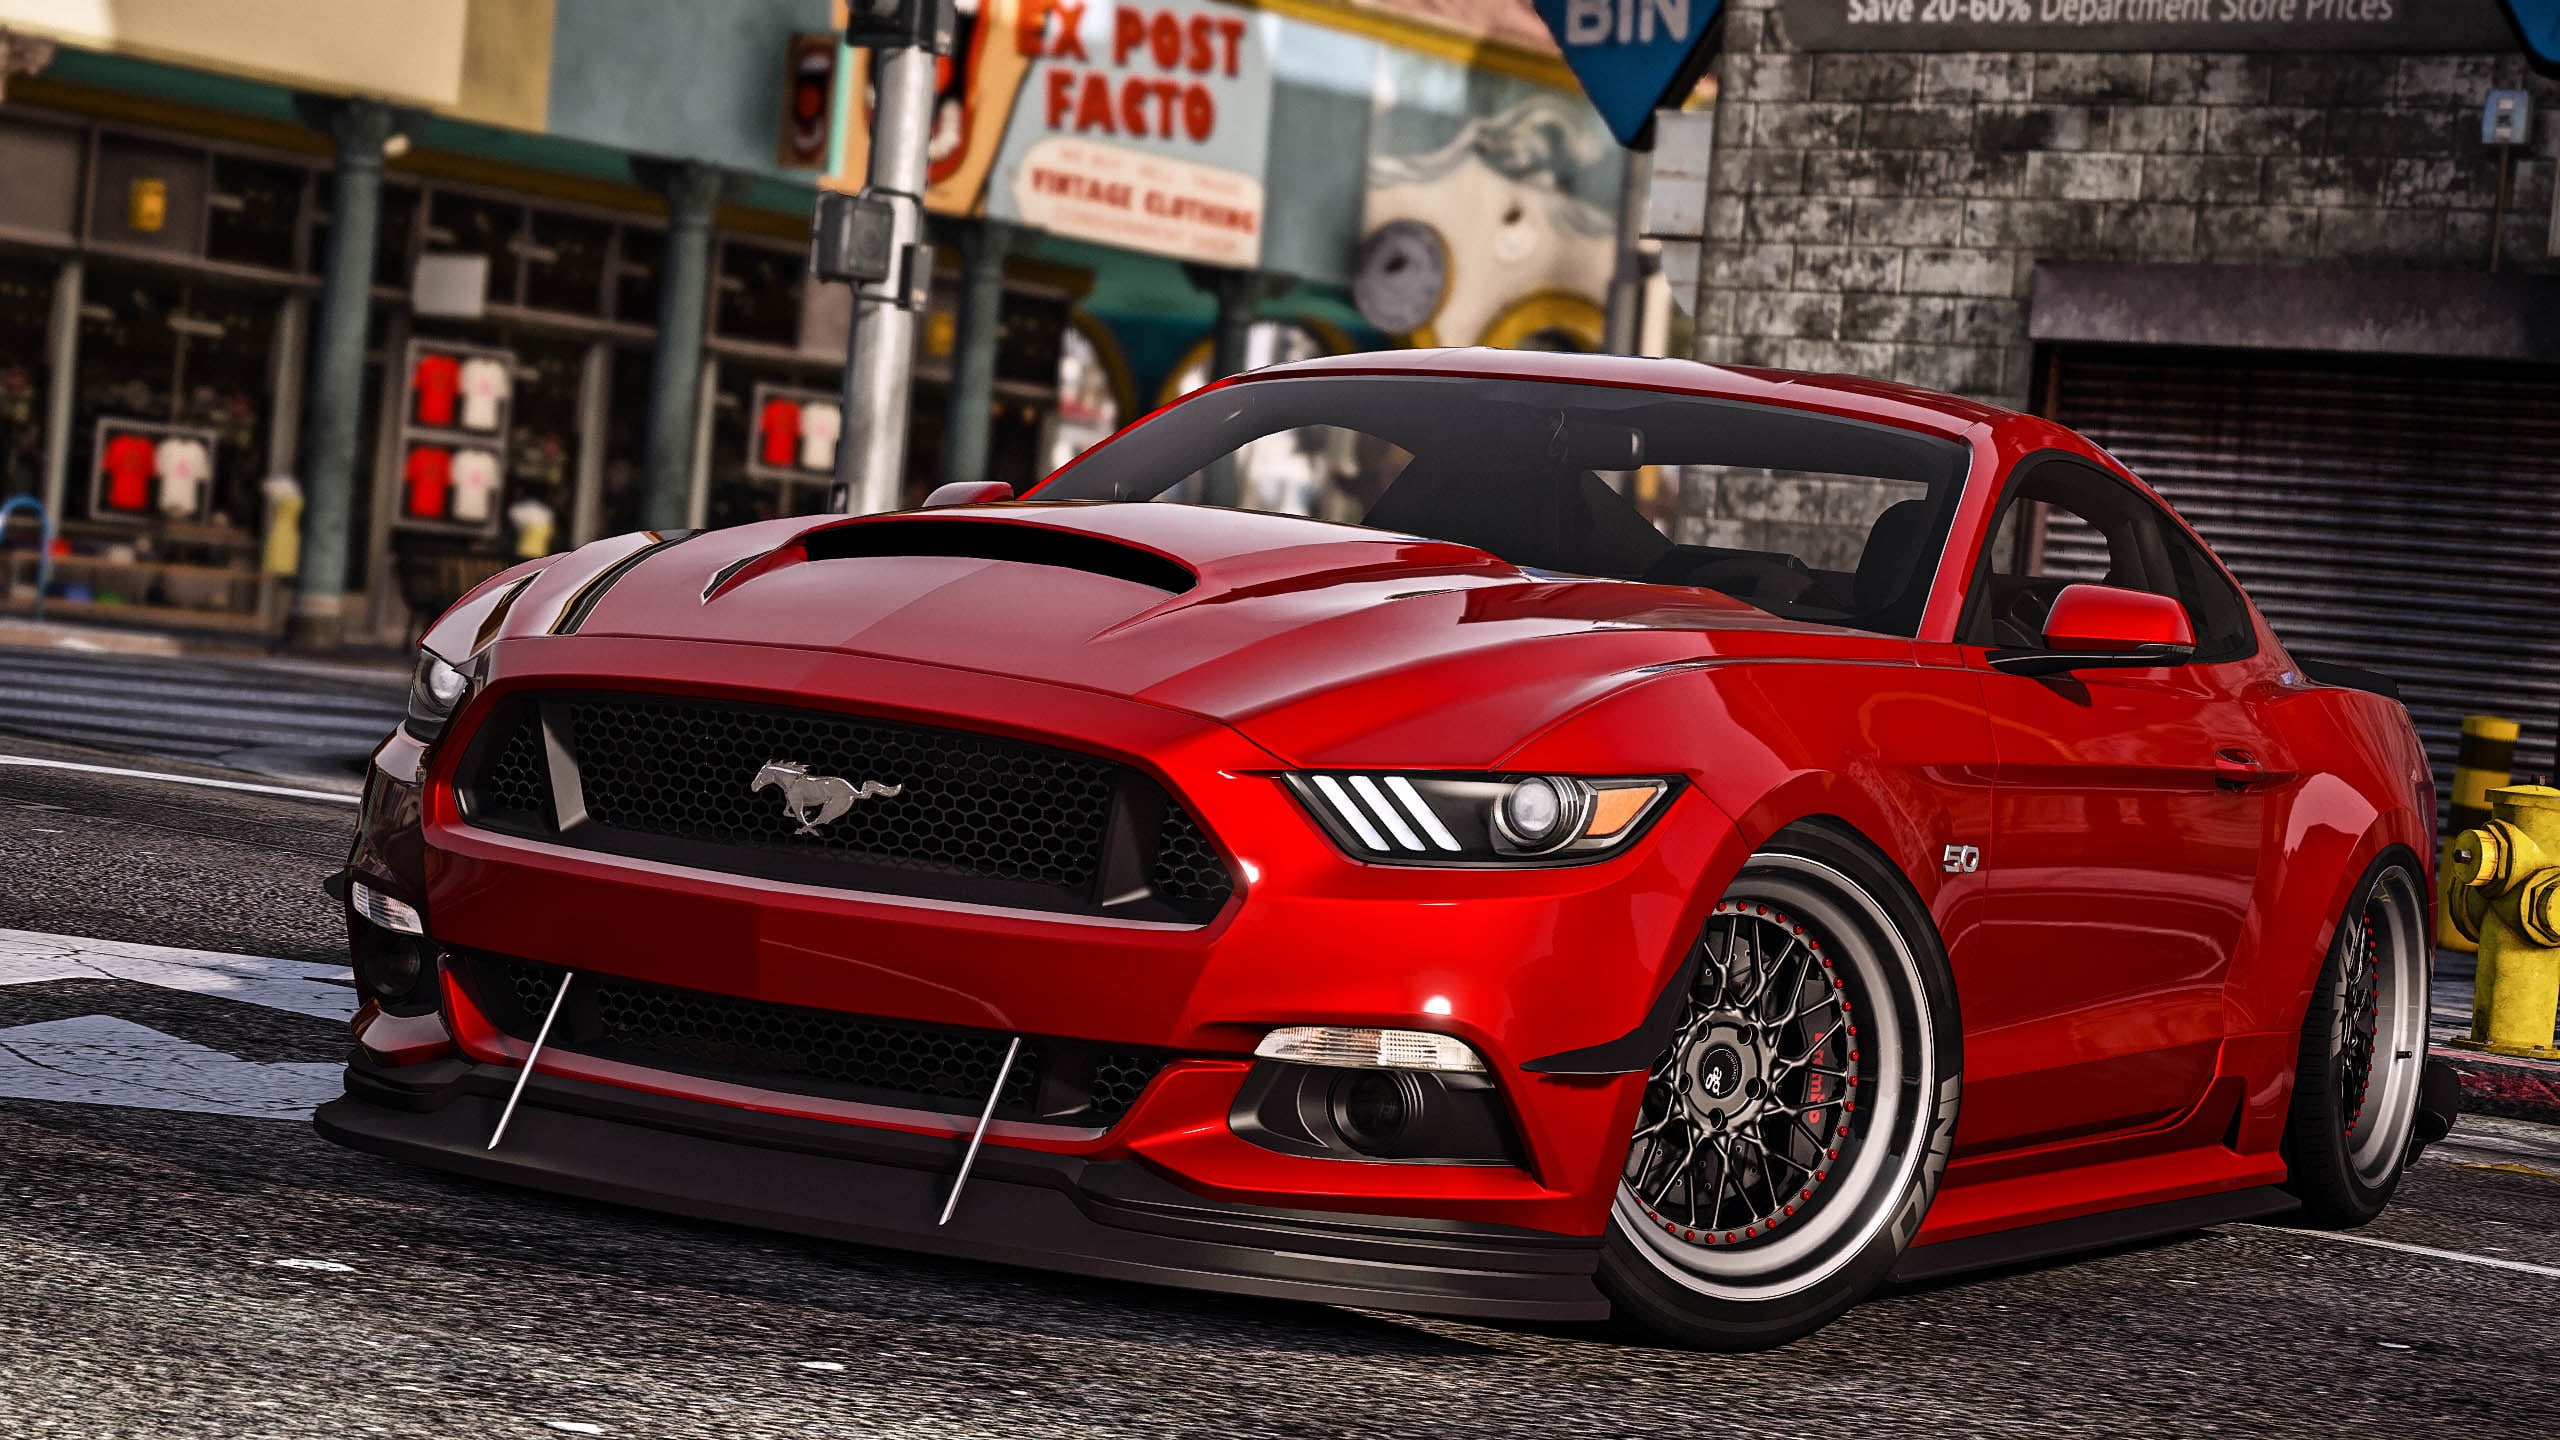 Ford Mustang, GTA, GT350, Grand Theft Auto V, mode of transportation